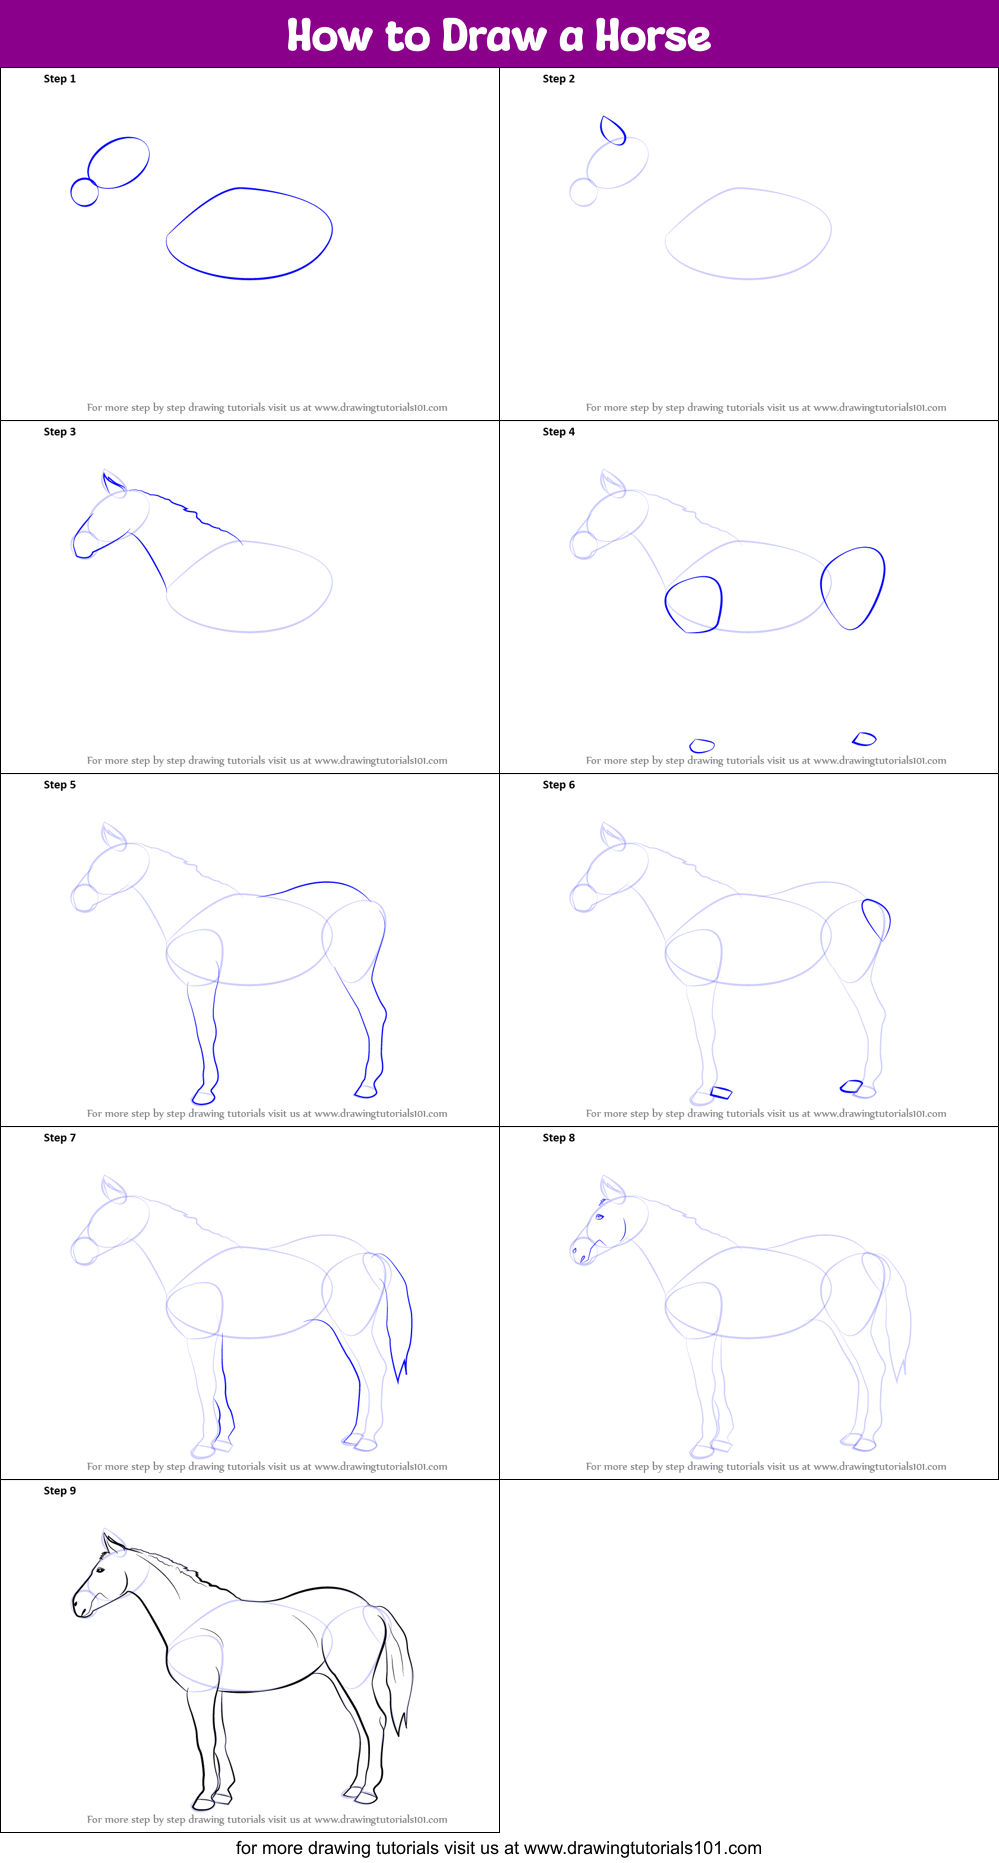 How to Draw a Horse printable step by step drawing sheet